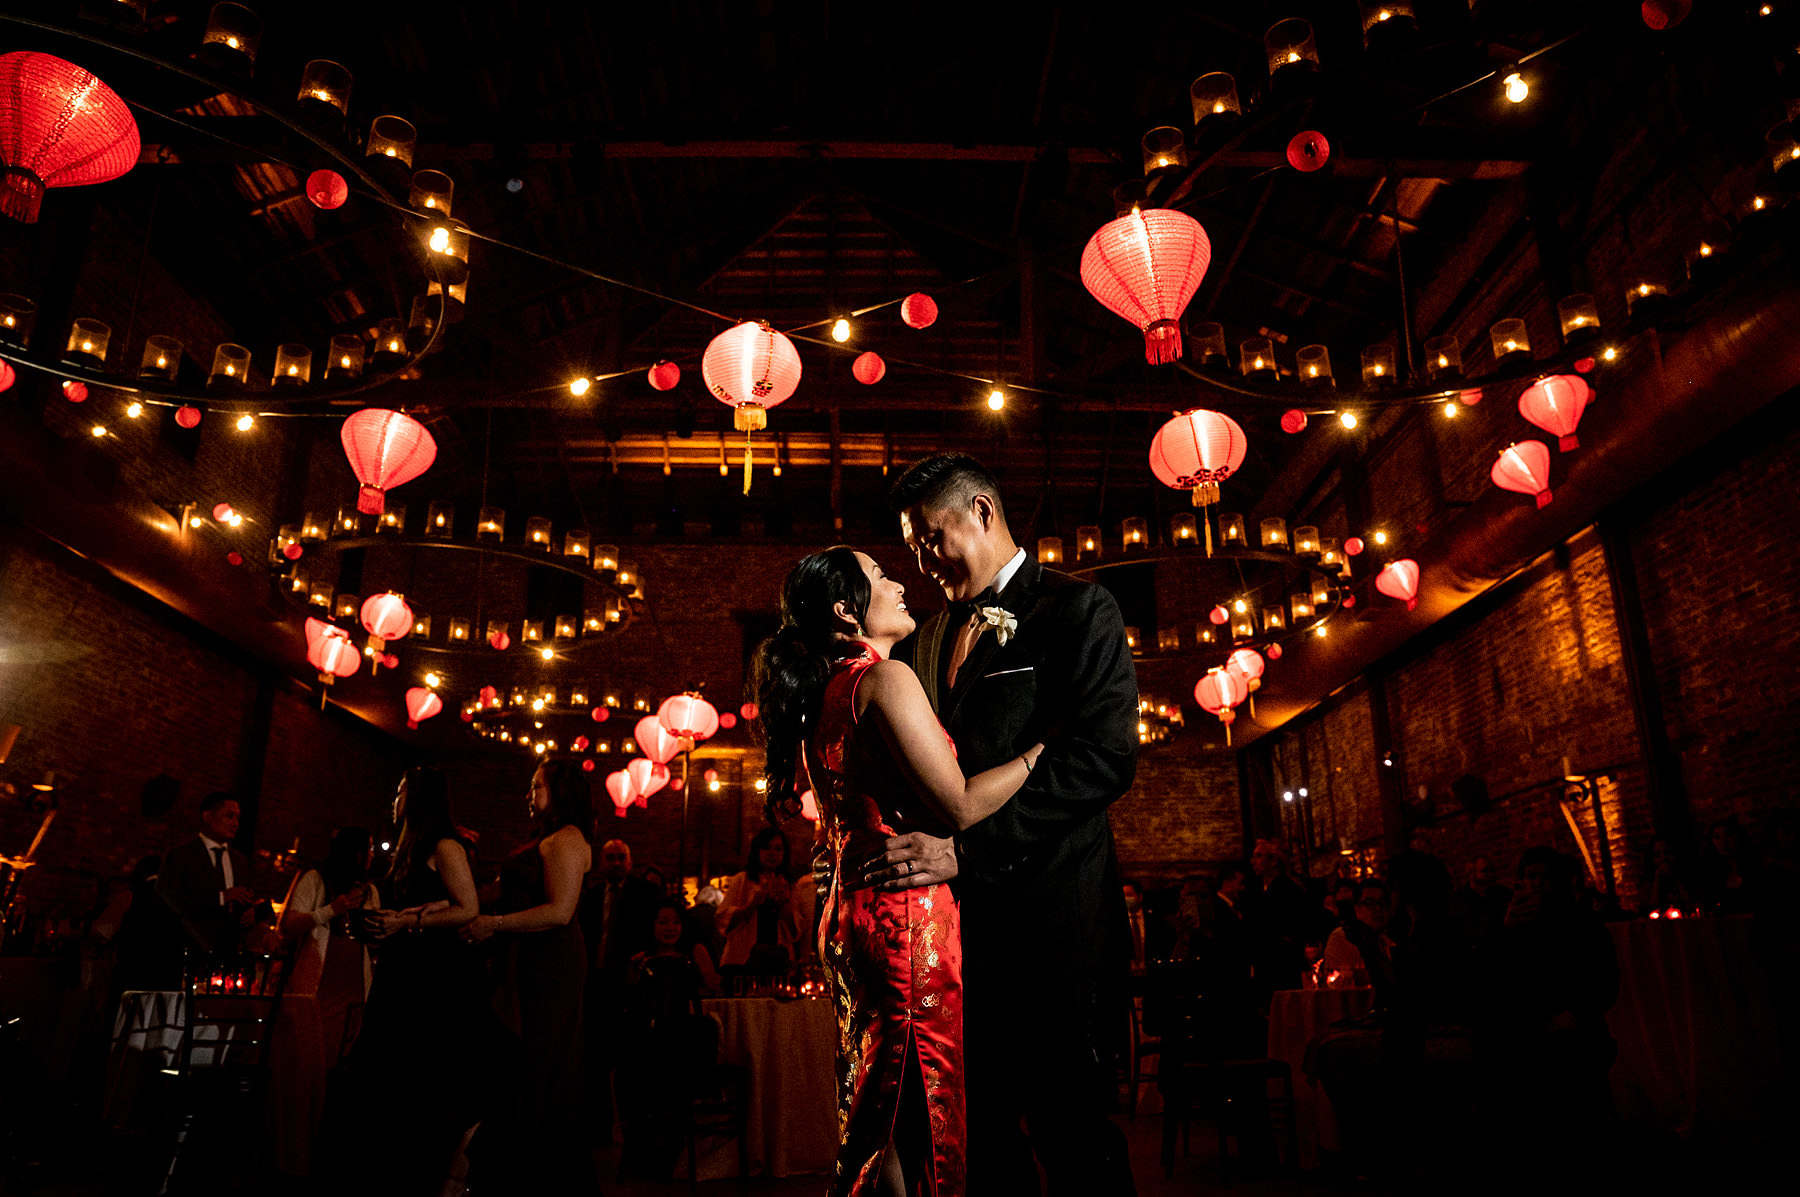 Barrel Room - The Estate Yountville Wedding Photo by Duy Ho